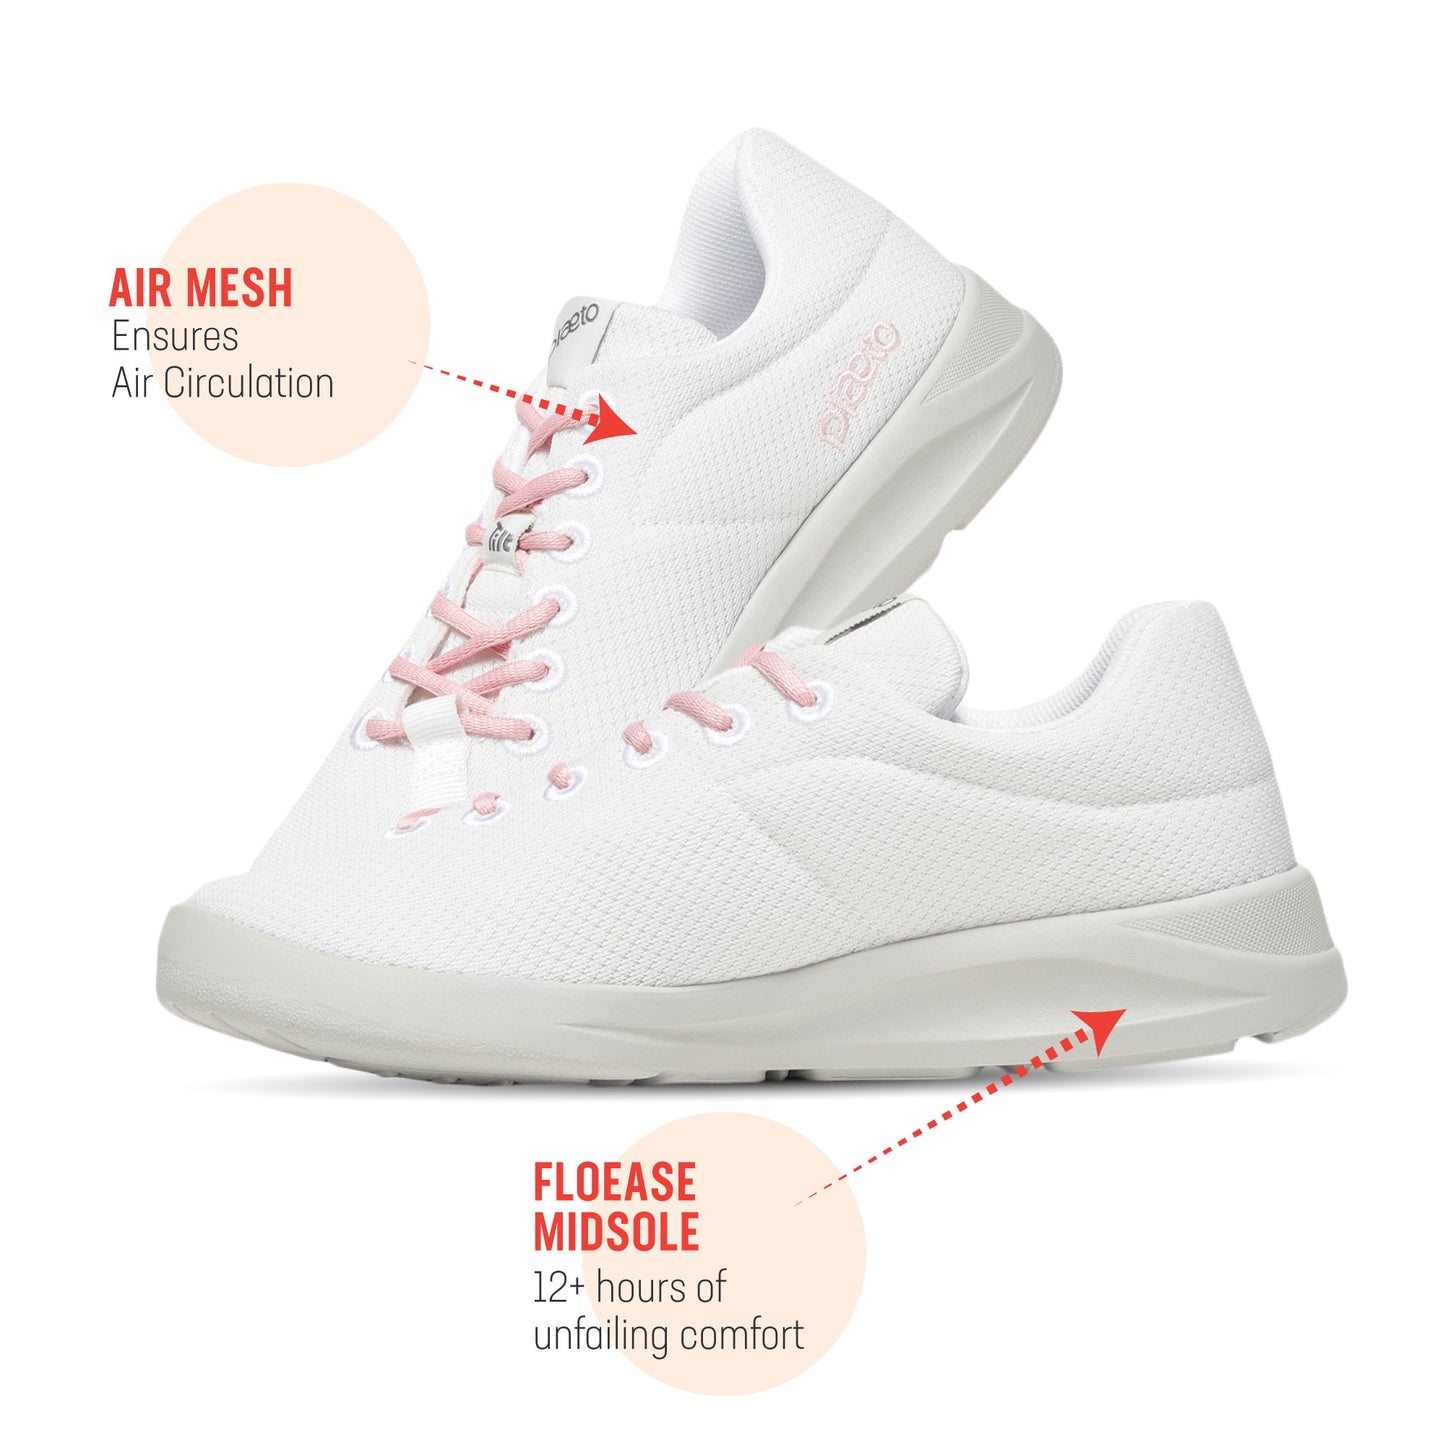 Classic Women's Multiplay Sneakers - White / Pink